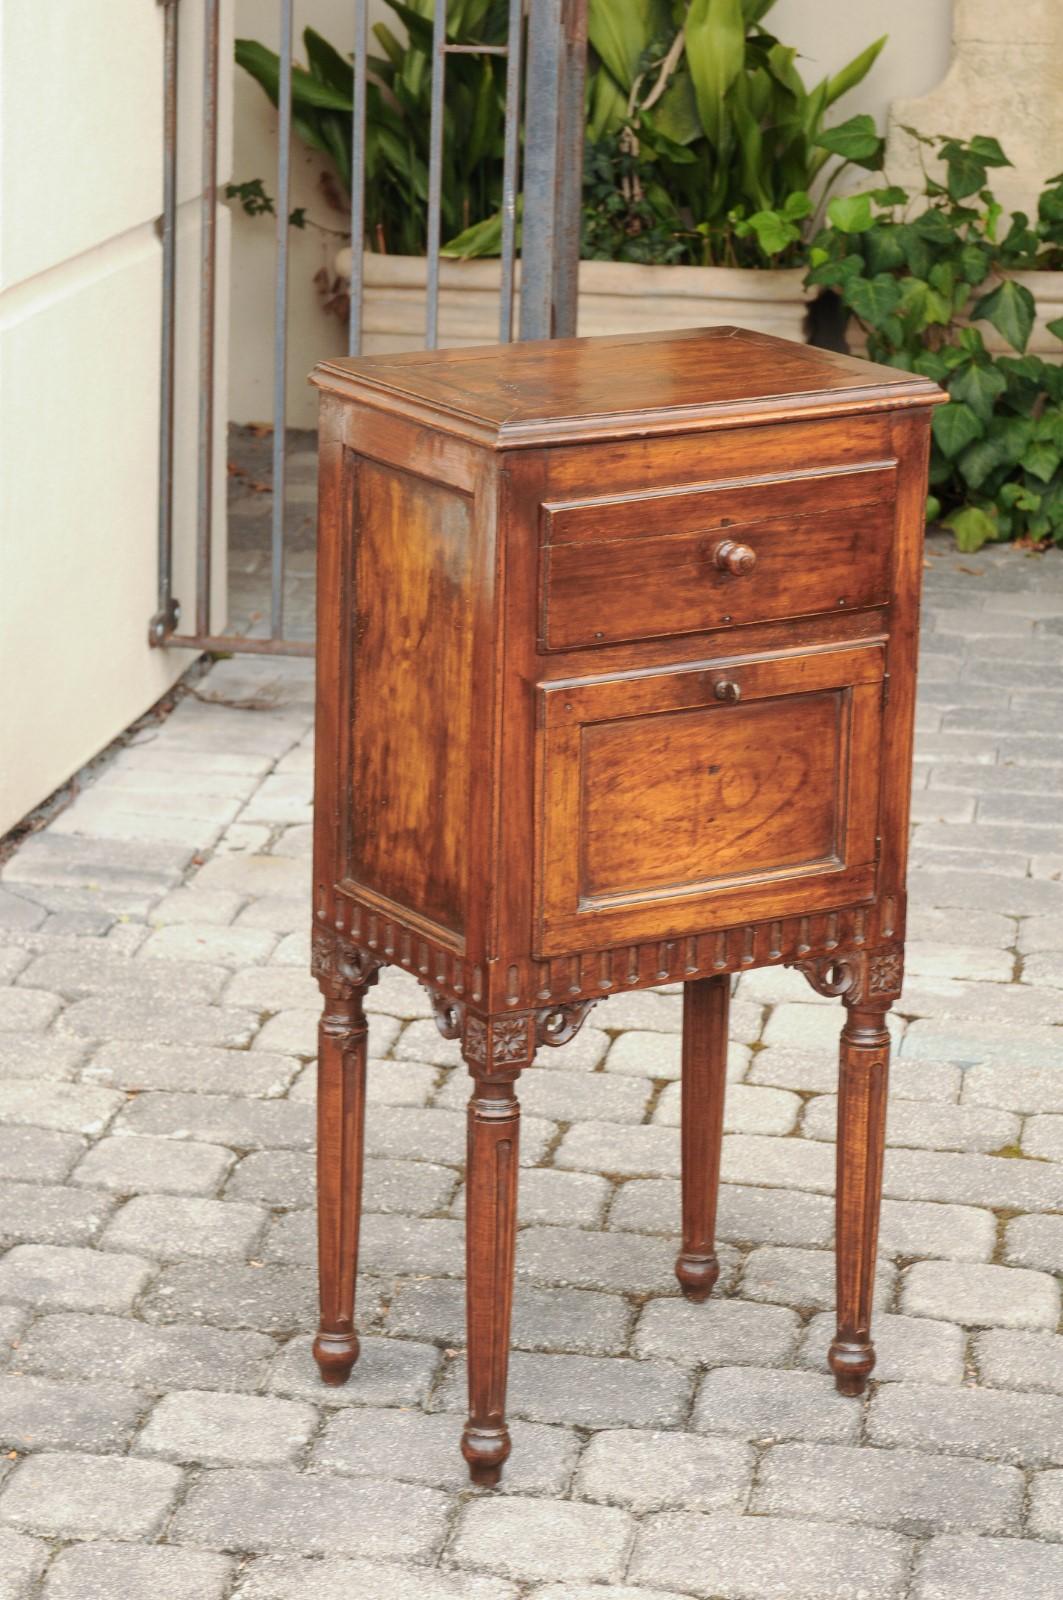 Neoclassical Pair of Italian Walnut Side Tables circa 1860 with Door, Drawer and Carved Skirt